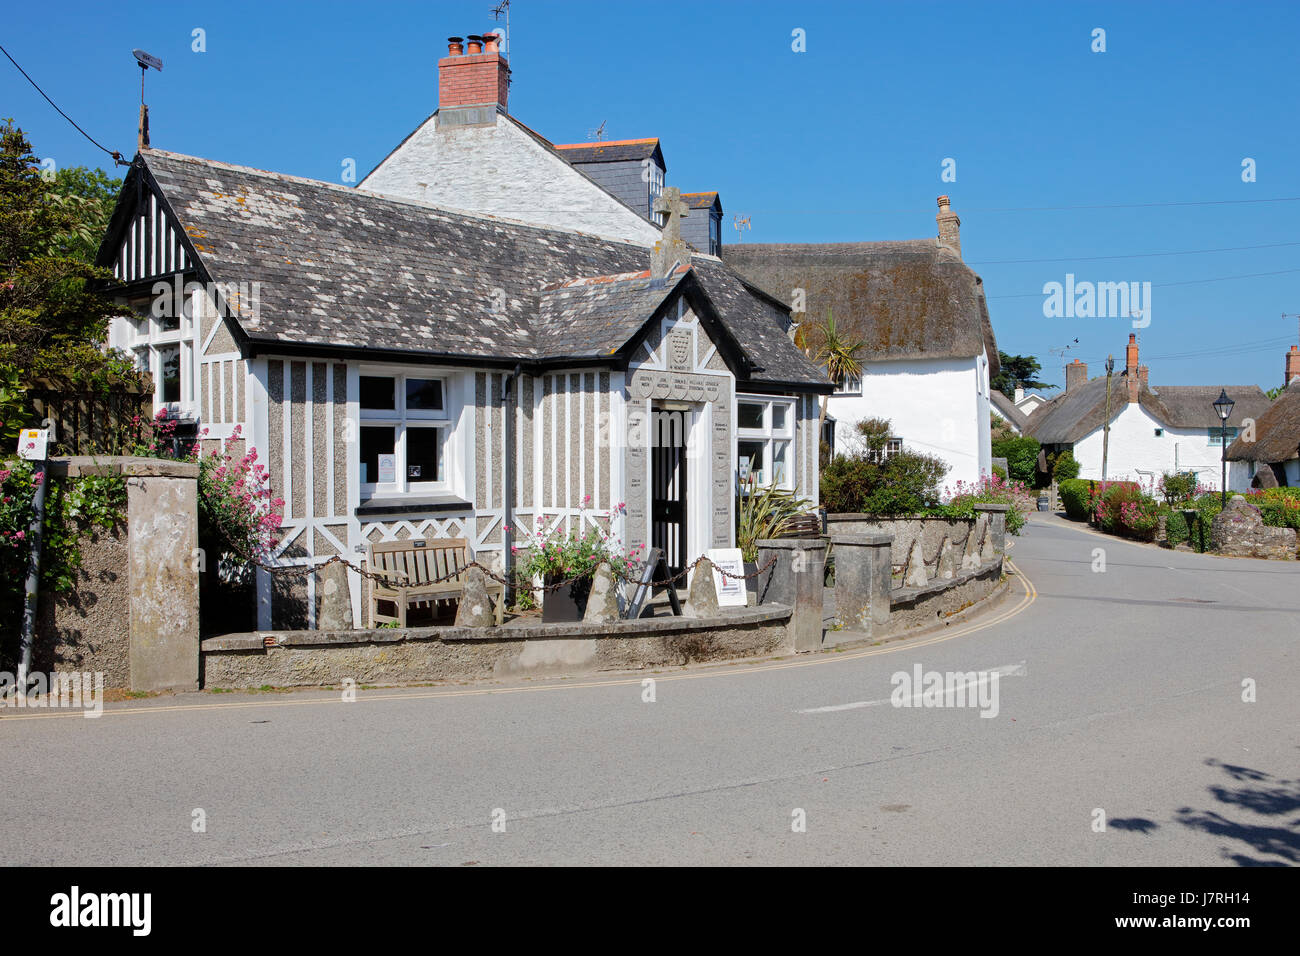 Crantock Village, Cornwall, UK. 25th May, 2017. Views of the village of Crantock. Part of series of photos documenting villages and towns in Cornwall Stock Photo